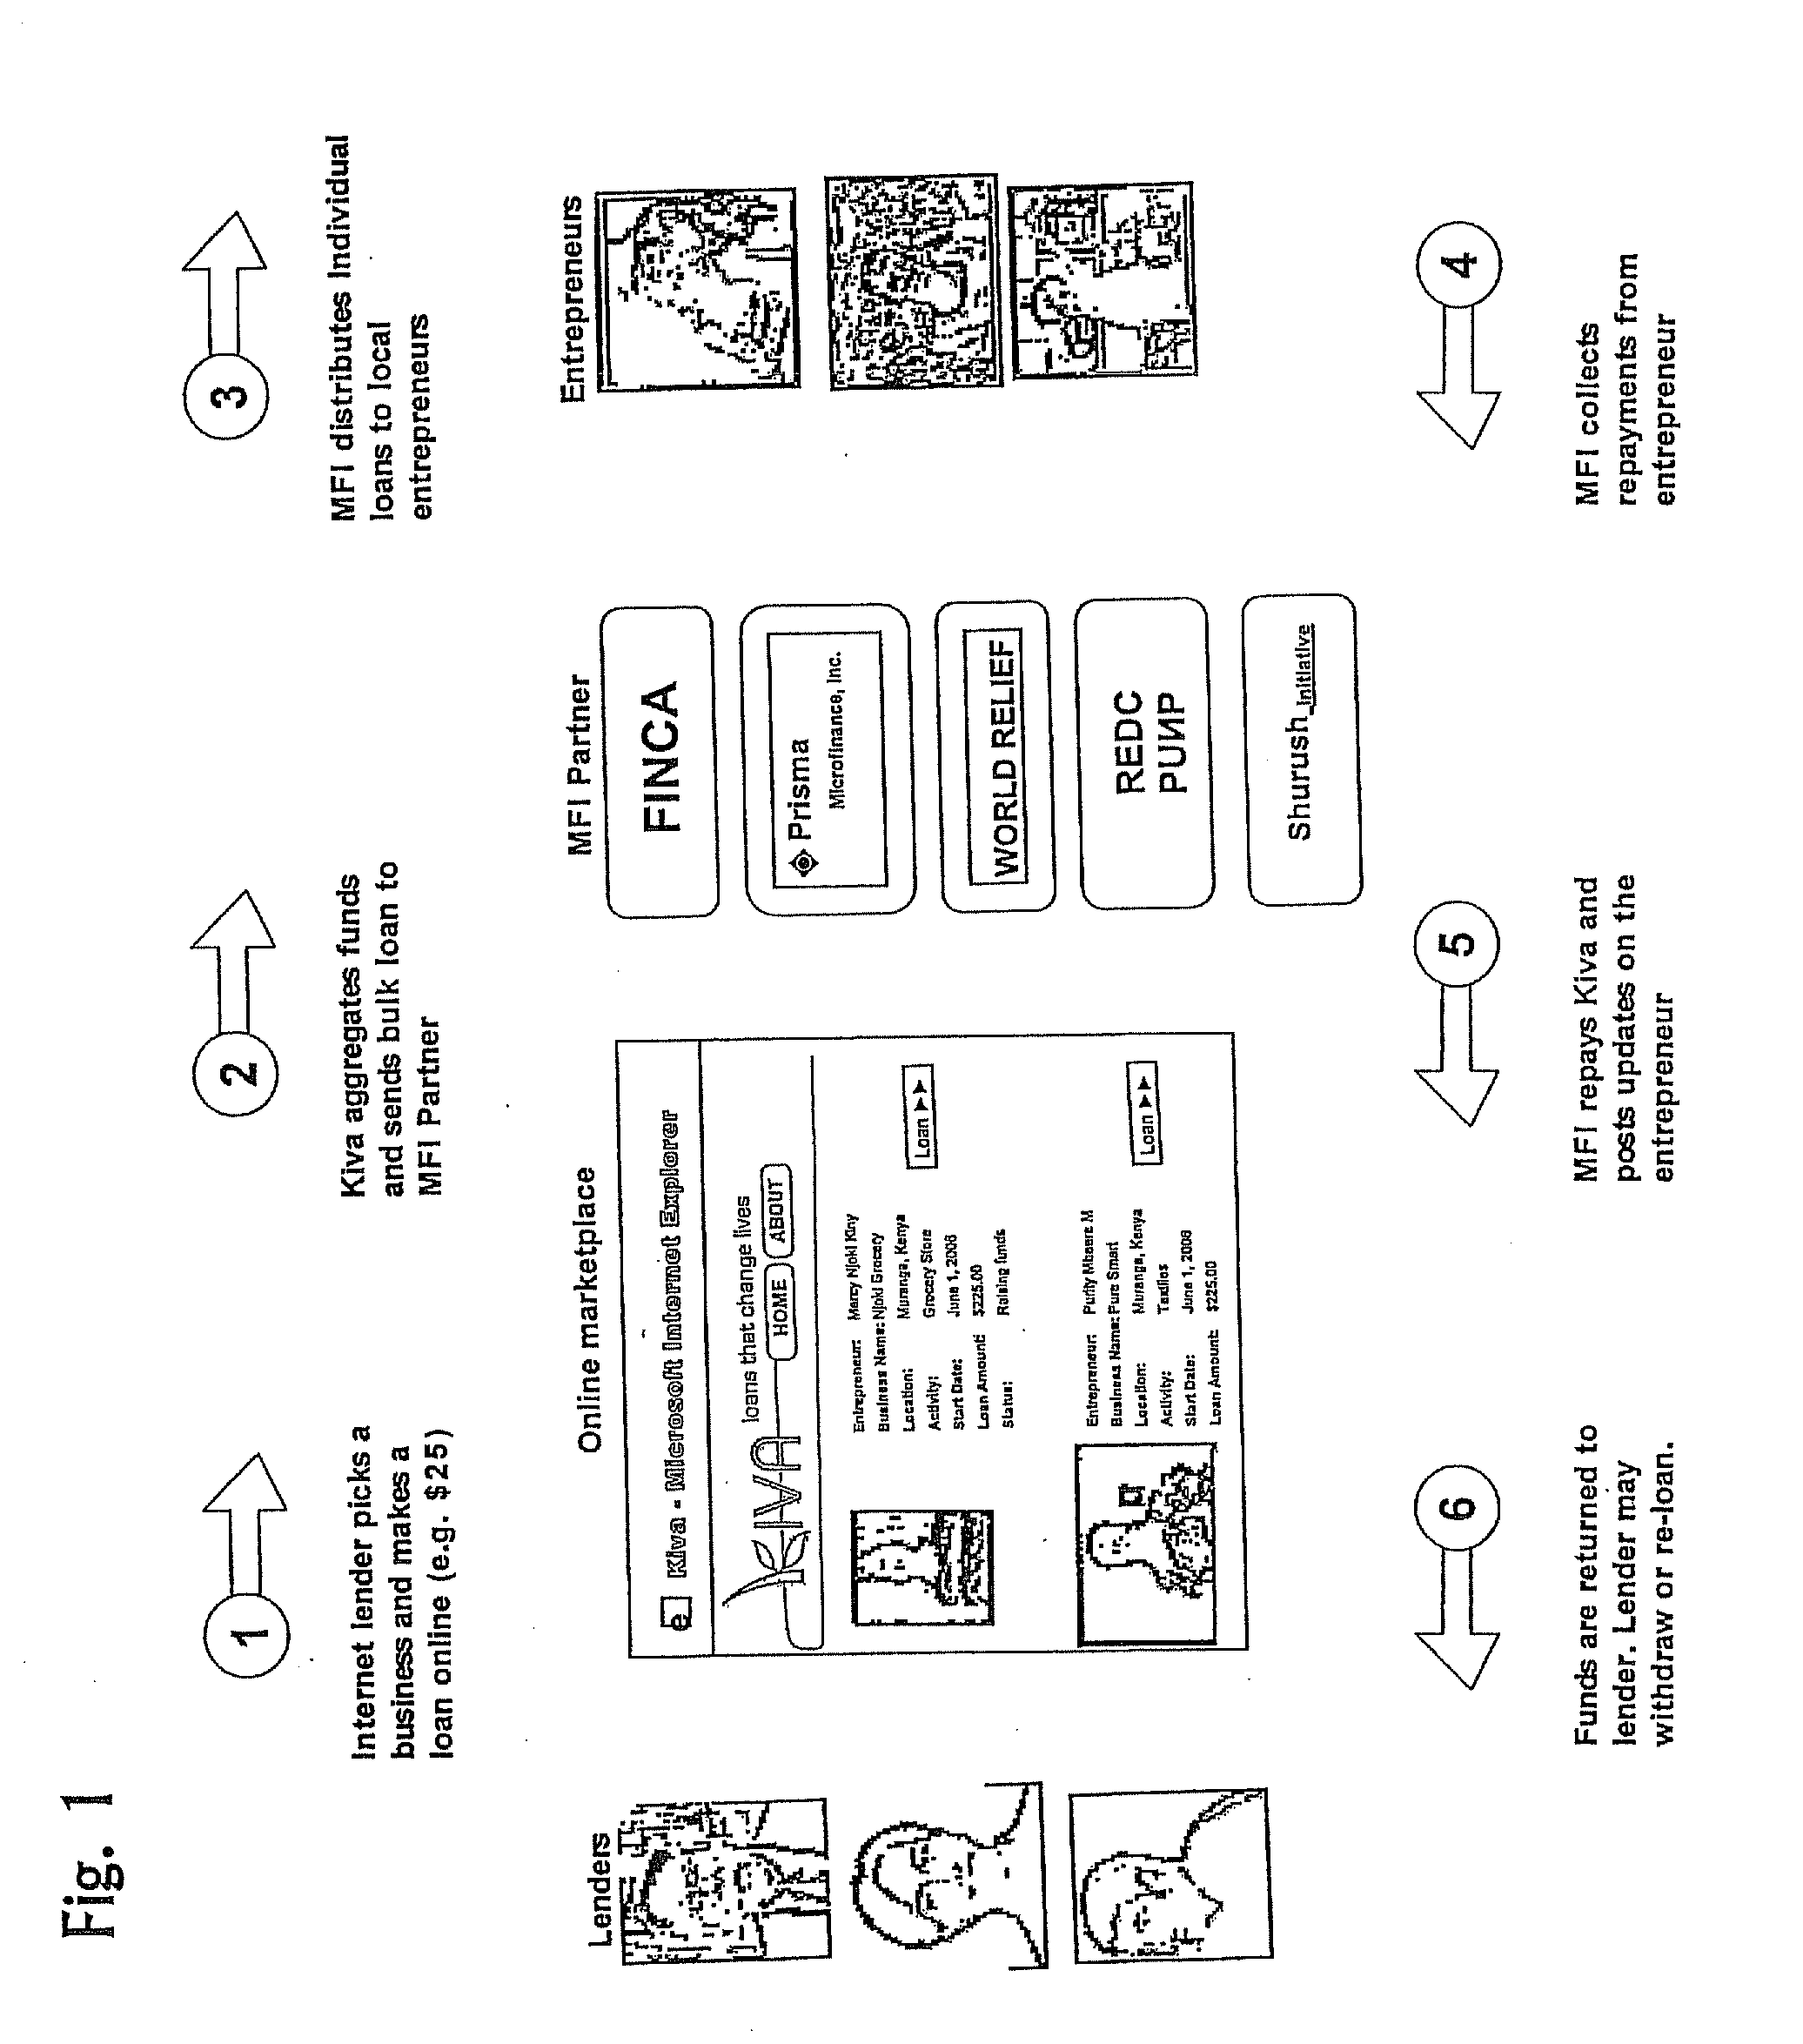 System and method for peer-to-peer financing